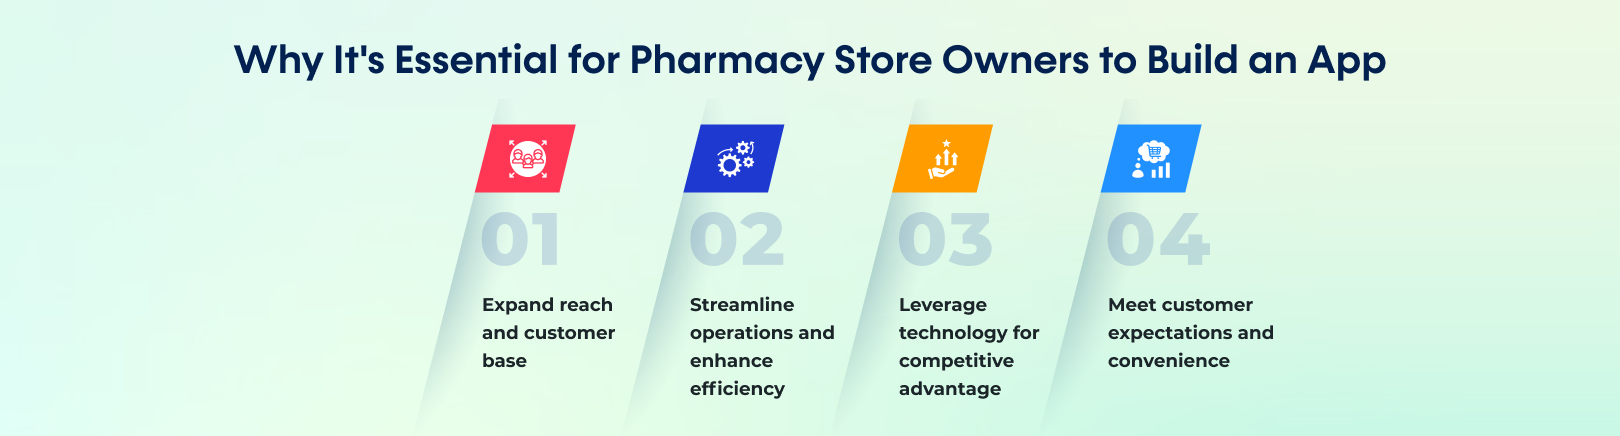 Why It's Essential for Pharmacy Store Owners to Build an App